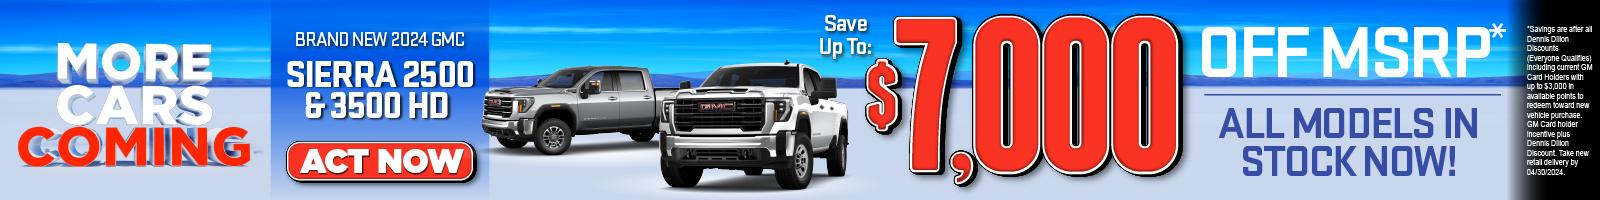 SAM - BRAND NEW 2024 GMC SIERRA 2500 & 3500 HD | Save up to $7,000 off MSRP*